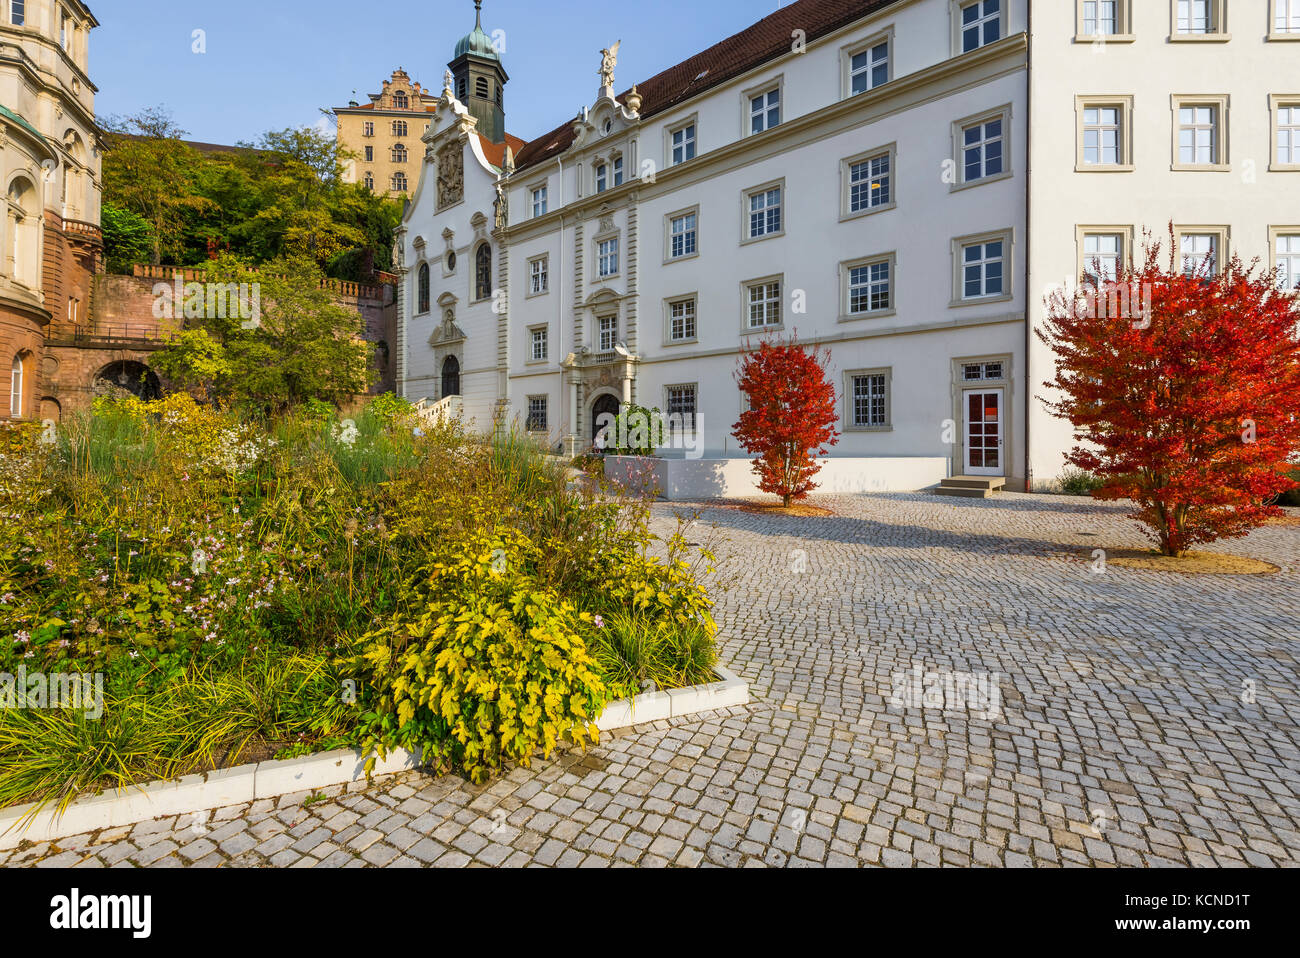 grammar school Klosterschule vom Heiligen Grab right, Friedrichsbad Therme on the left and the new castle above in the spa town Baden-Baden, Germany Stock Photo